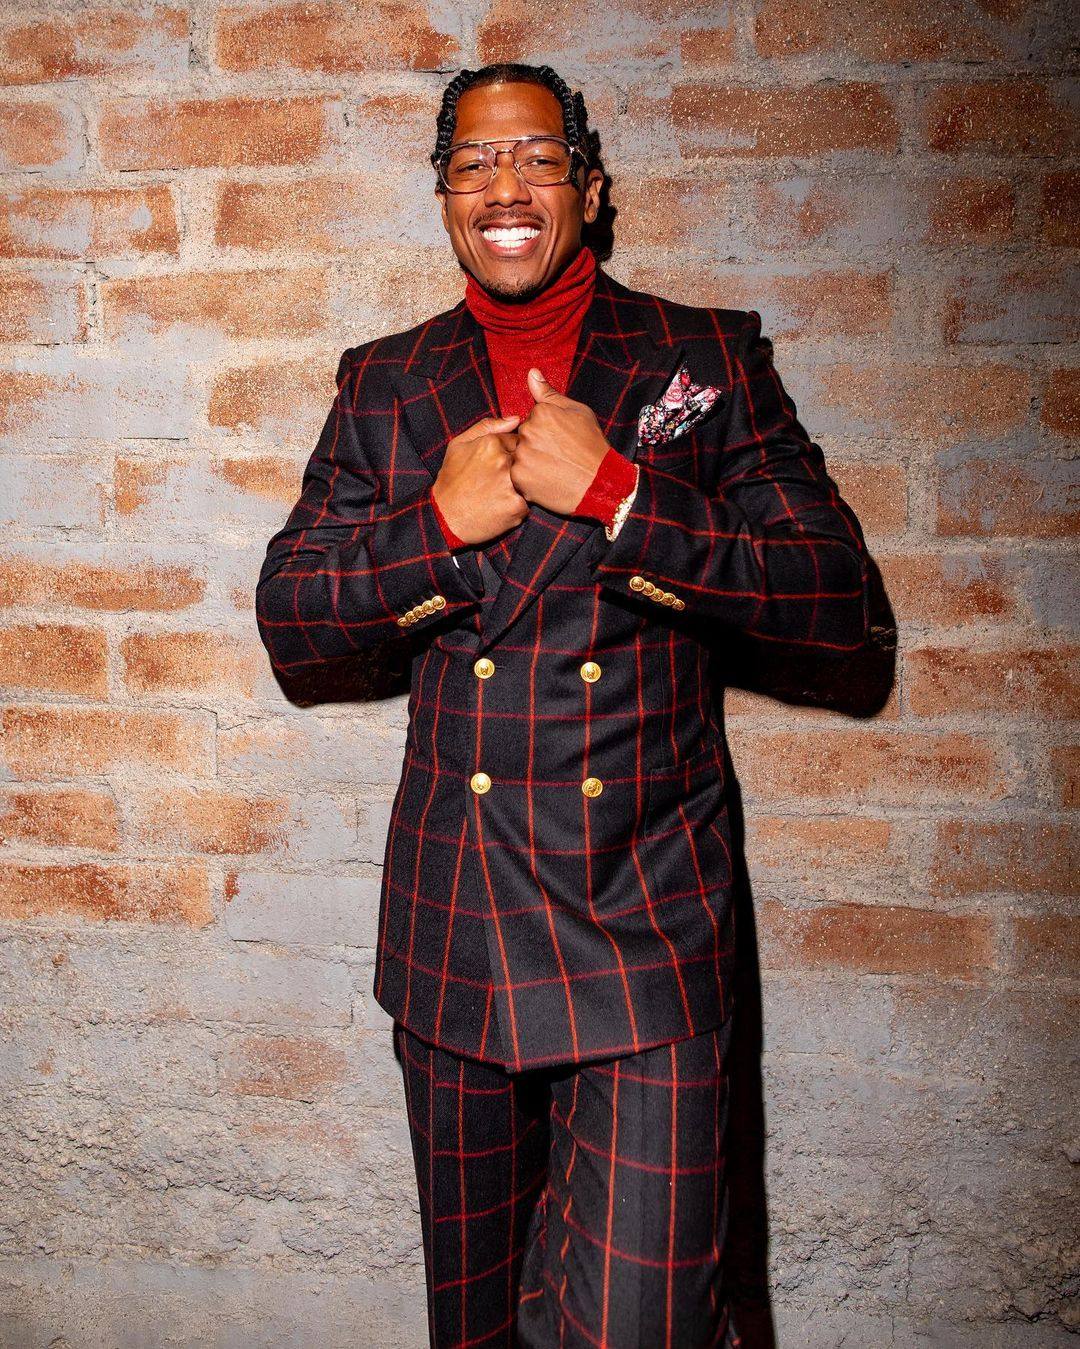 How does Nick Cannon make millions to support his 11 kids? The America's Got Talent host says he spends US$200,000 on trips to Disneyland alone, and funds it through his films, podcasts and TV gigs | South China Morning Post